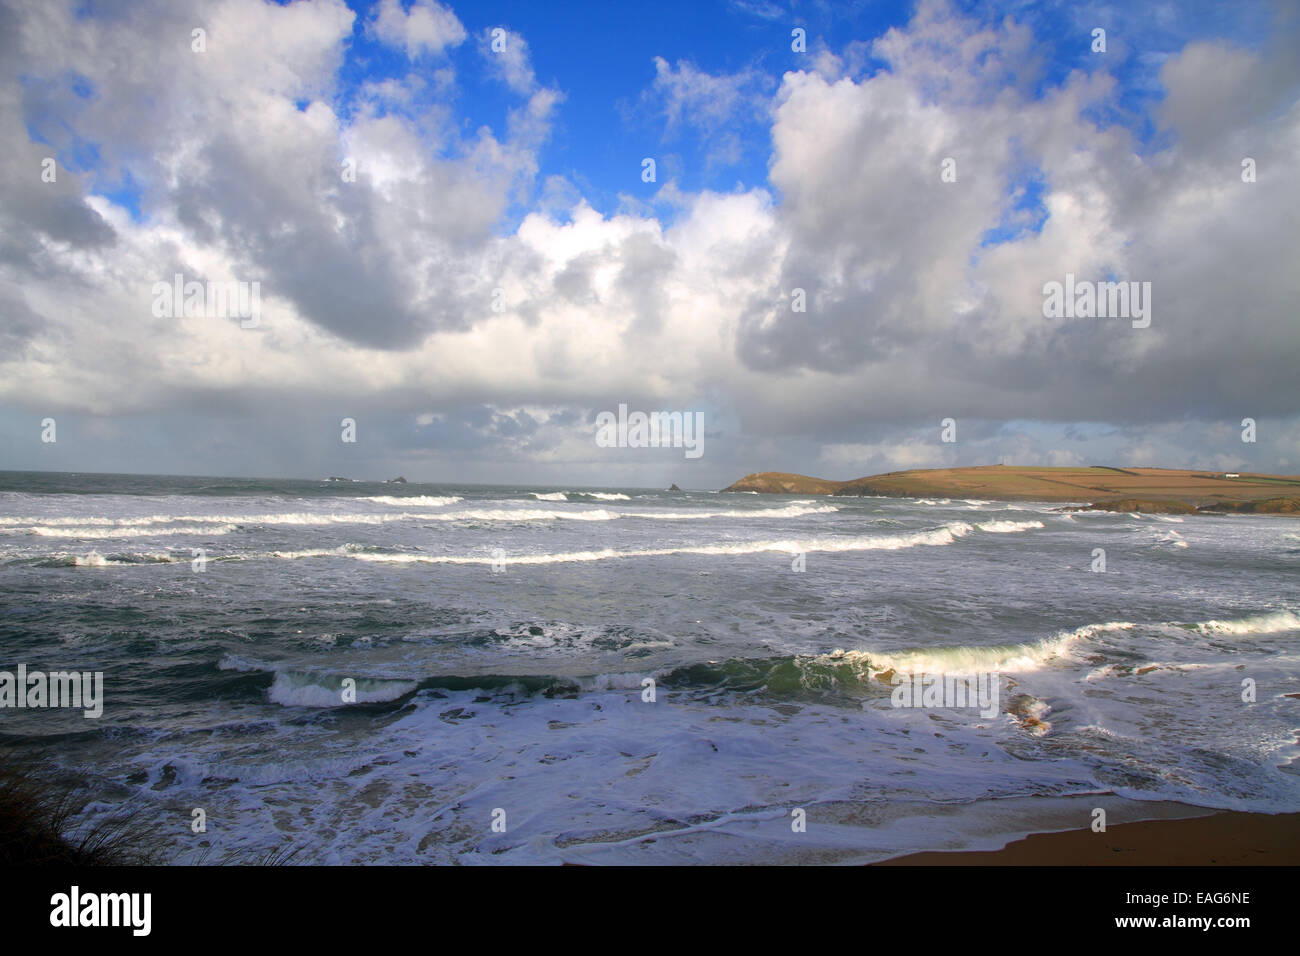 View across Constantine Bay, St. Merryn, North Cornwall, England. Choppy sea and dramatic sky Stock Photo